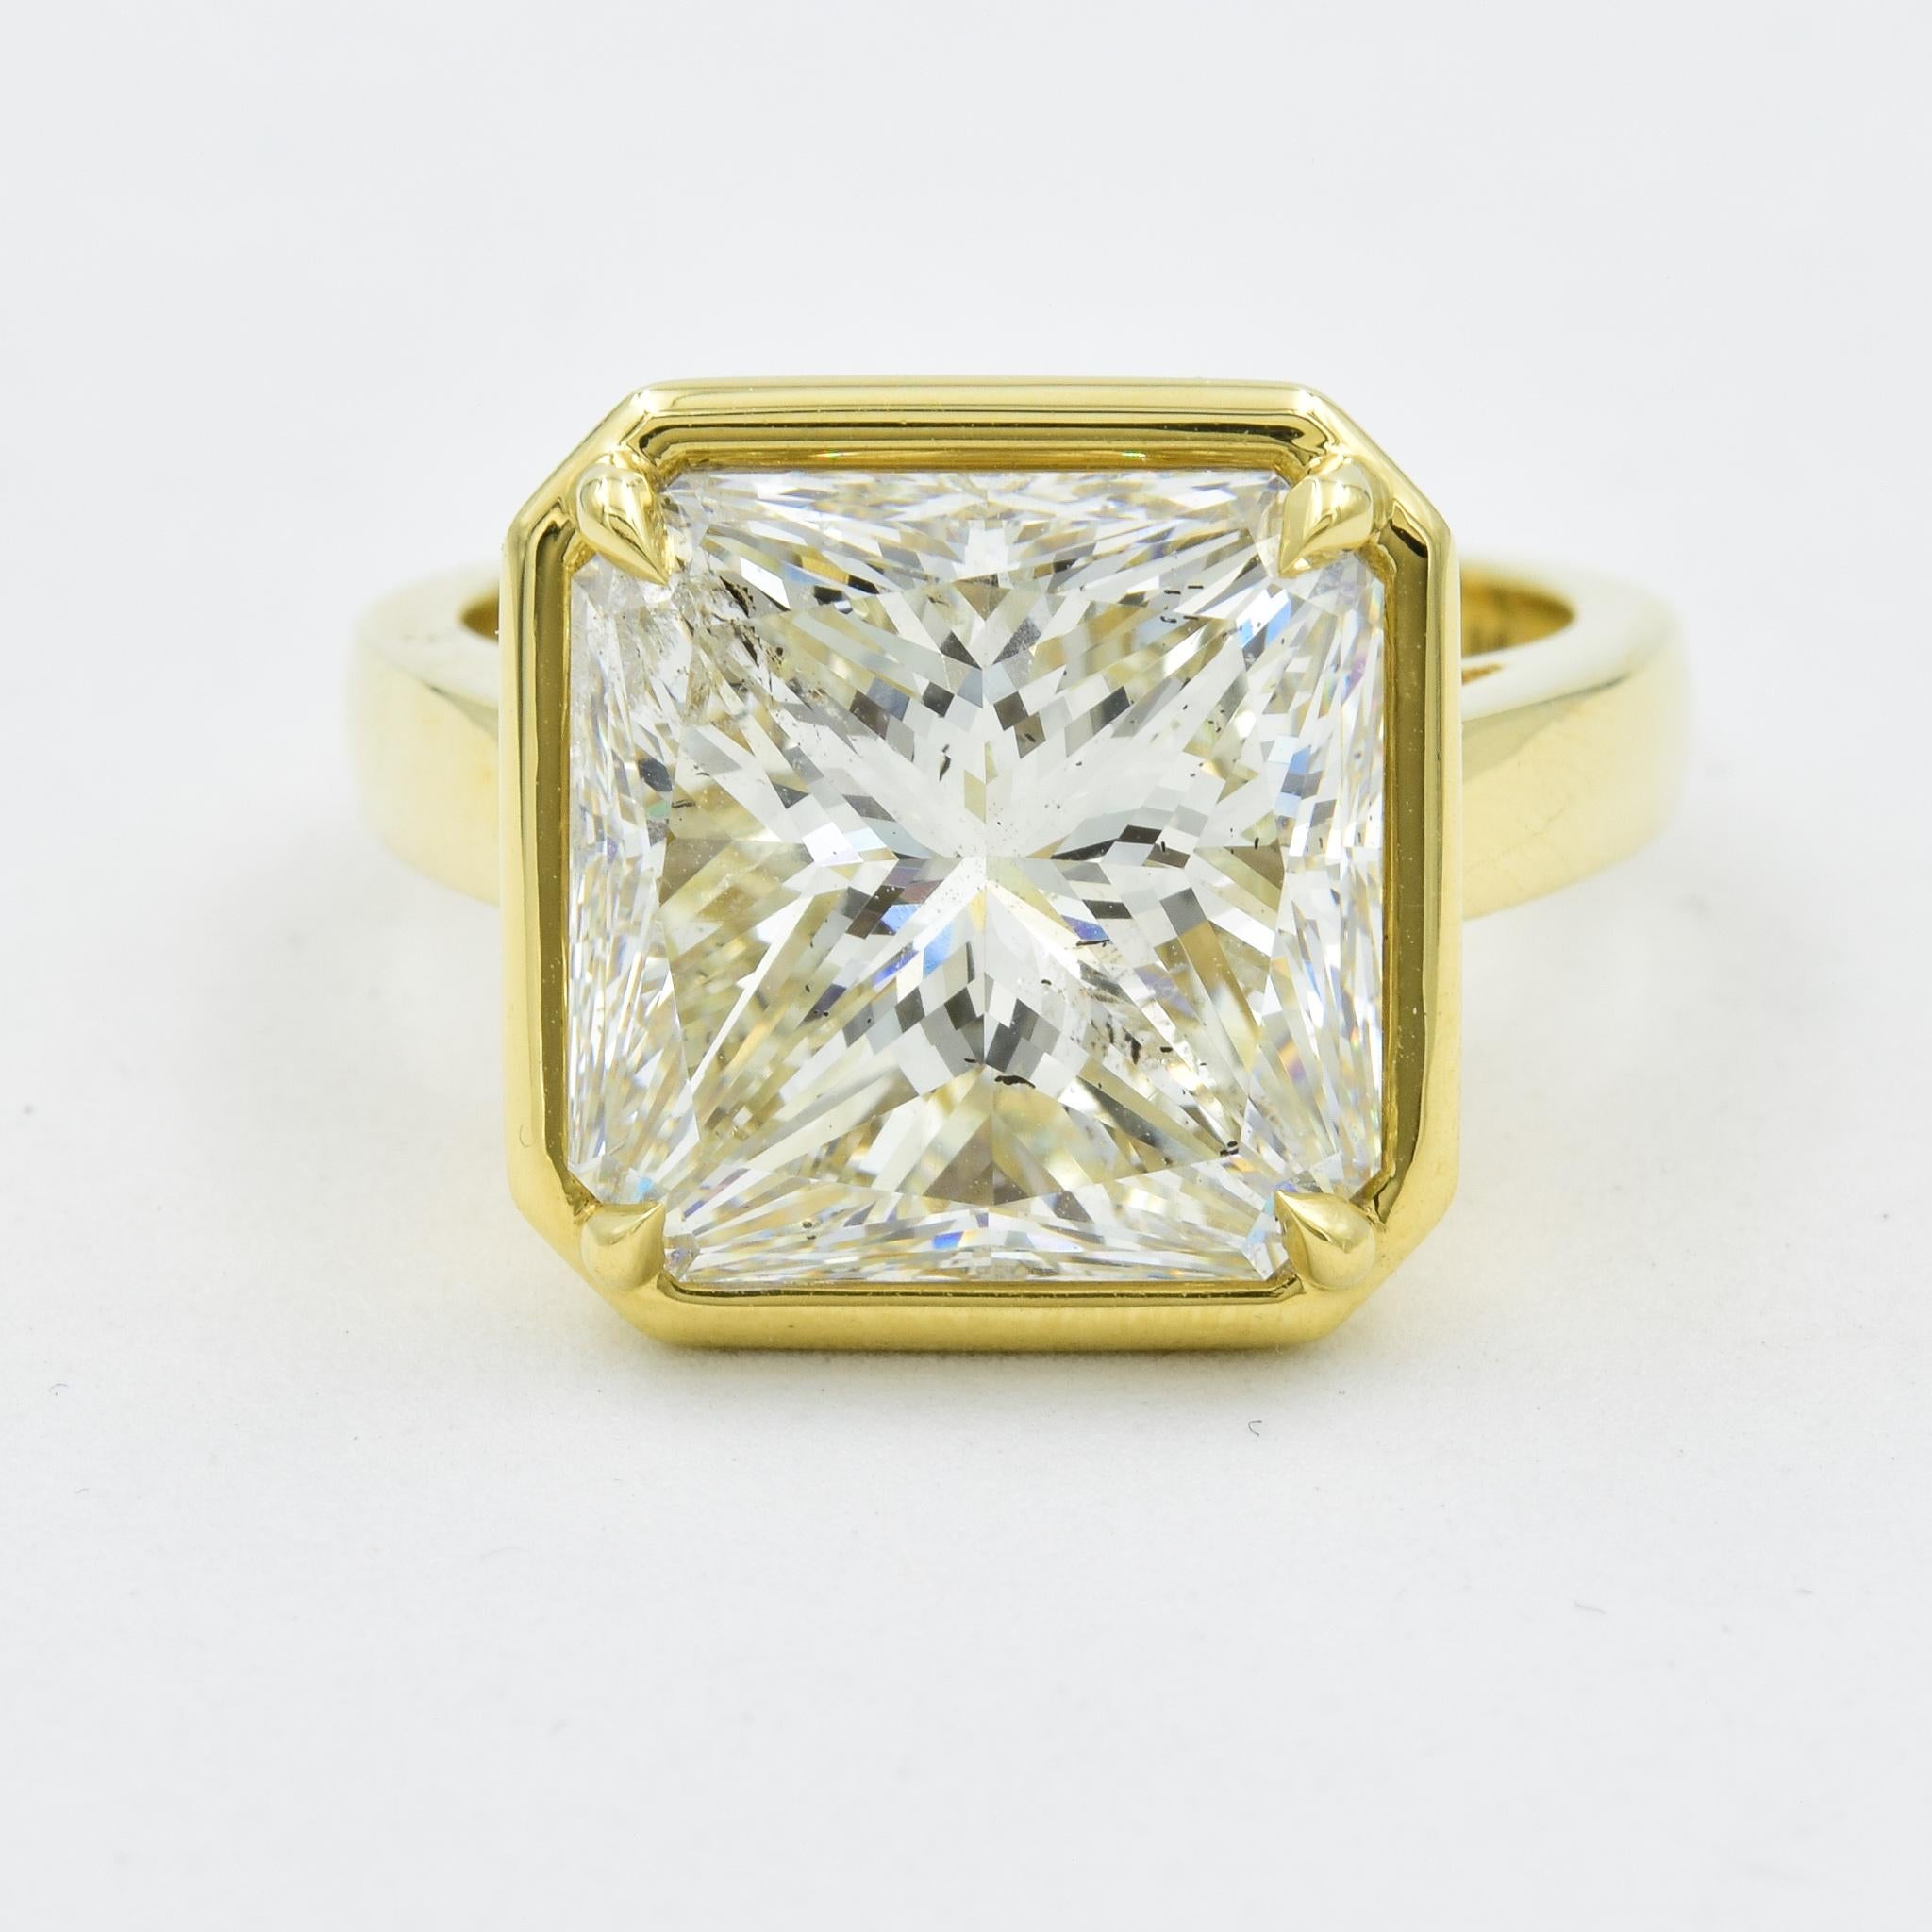 This stunning engagement ring hosts a 9.17 carat Radiant cut diamond in an 18k yellow gold mount with a bezel style setting.  The diamond has a beautiful light performance and has been certified by GIA.  The mounting works perfectly for this diamond